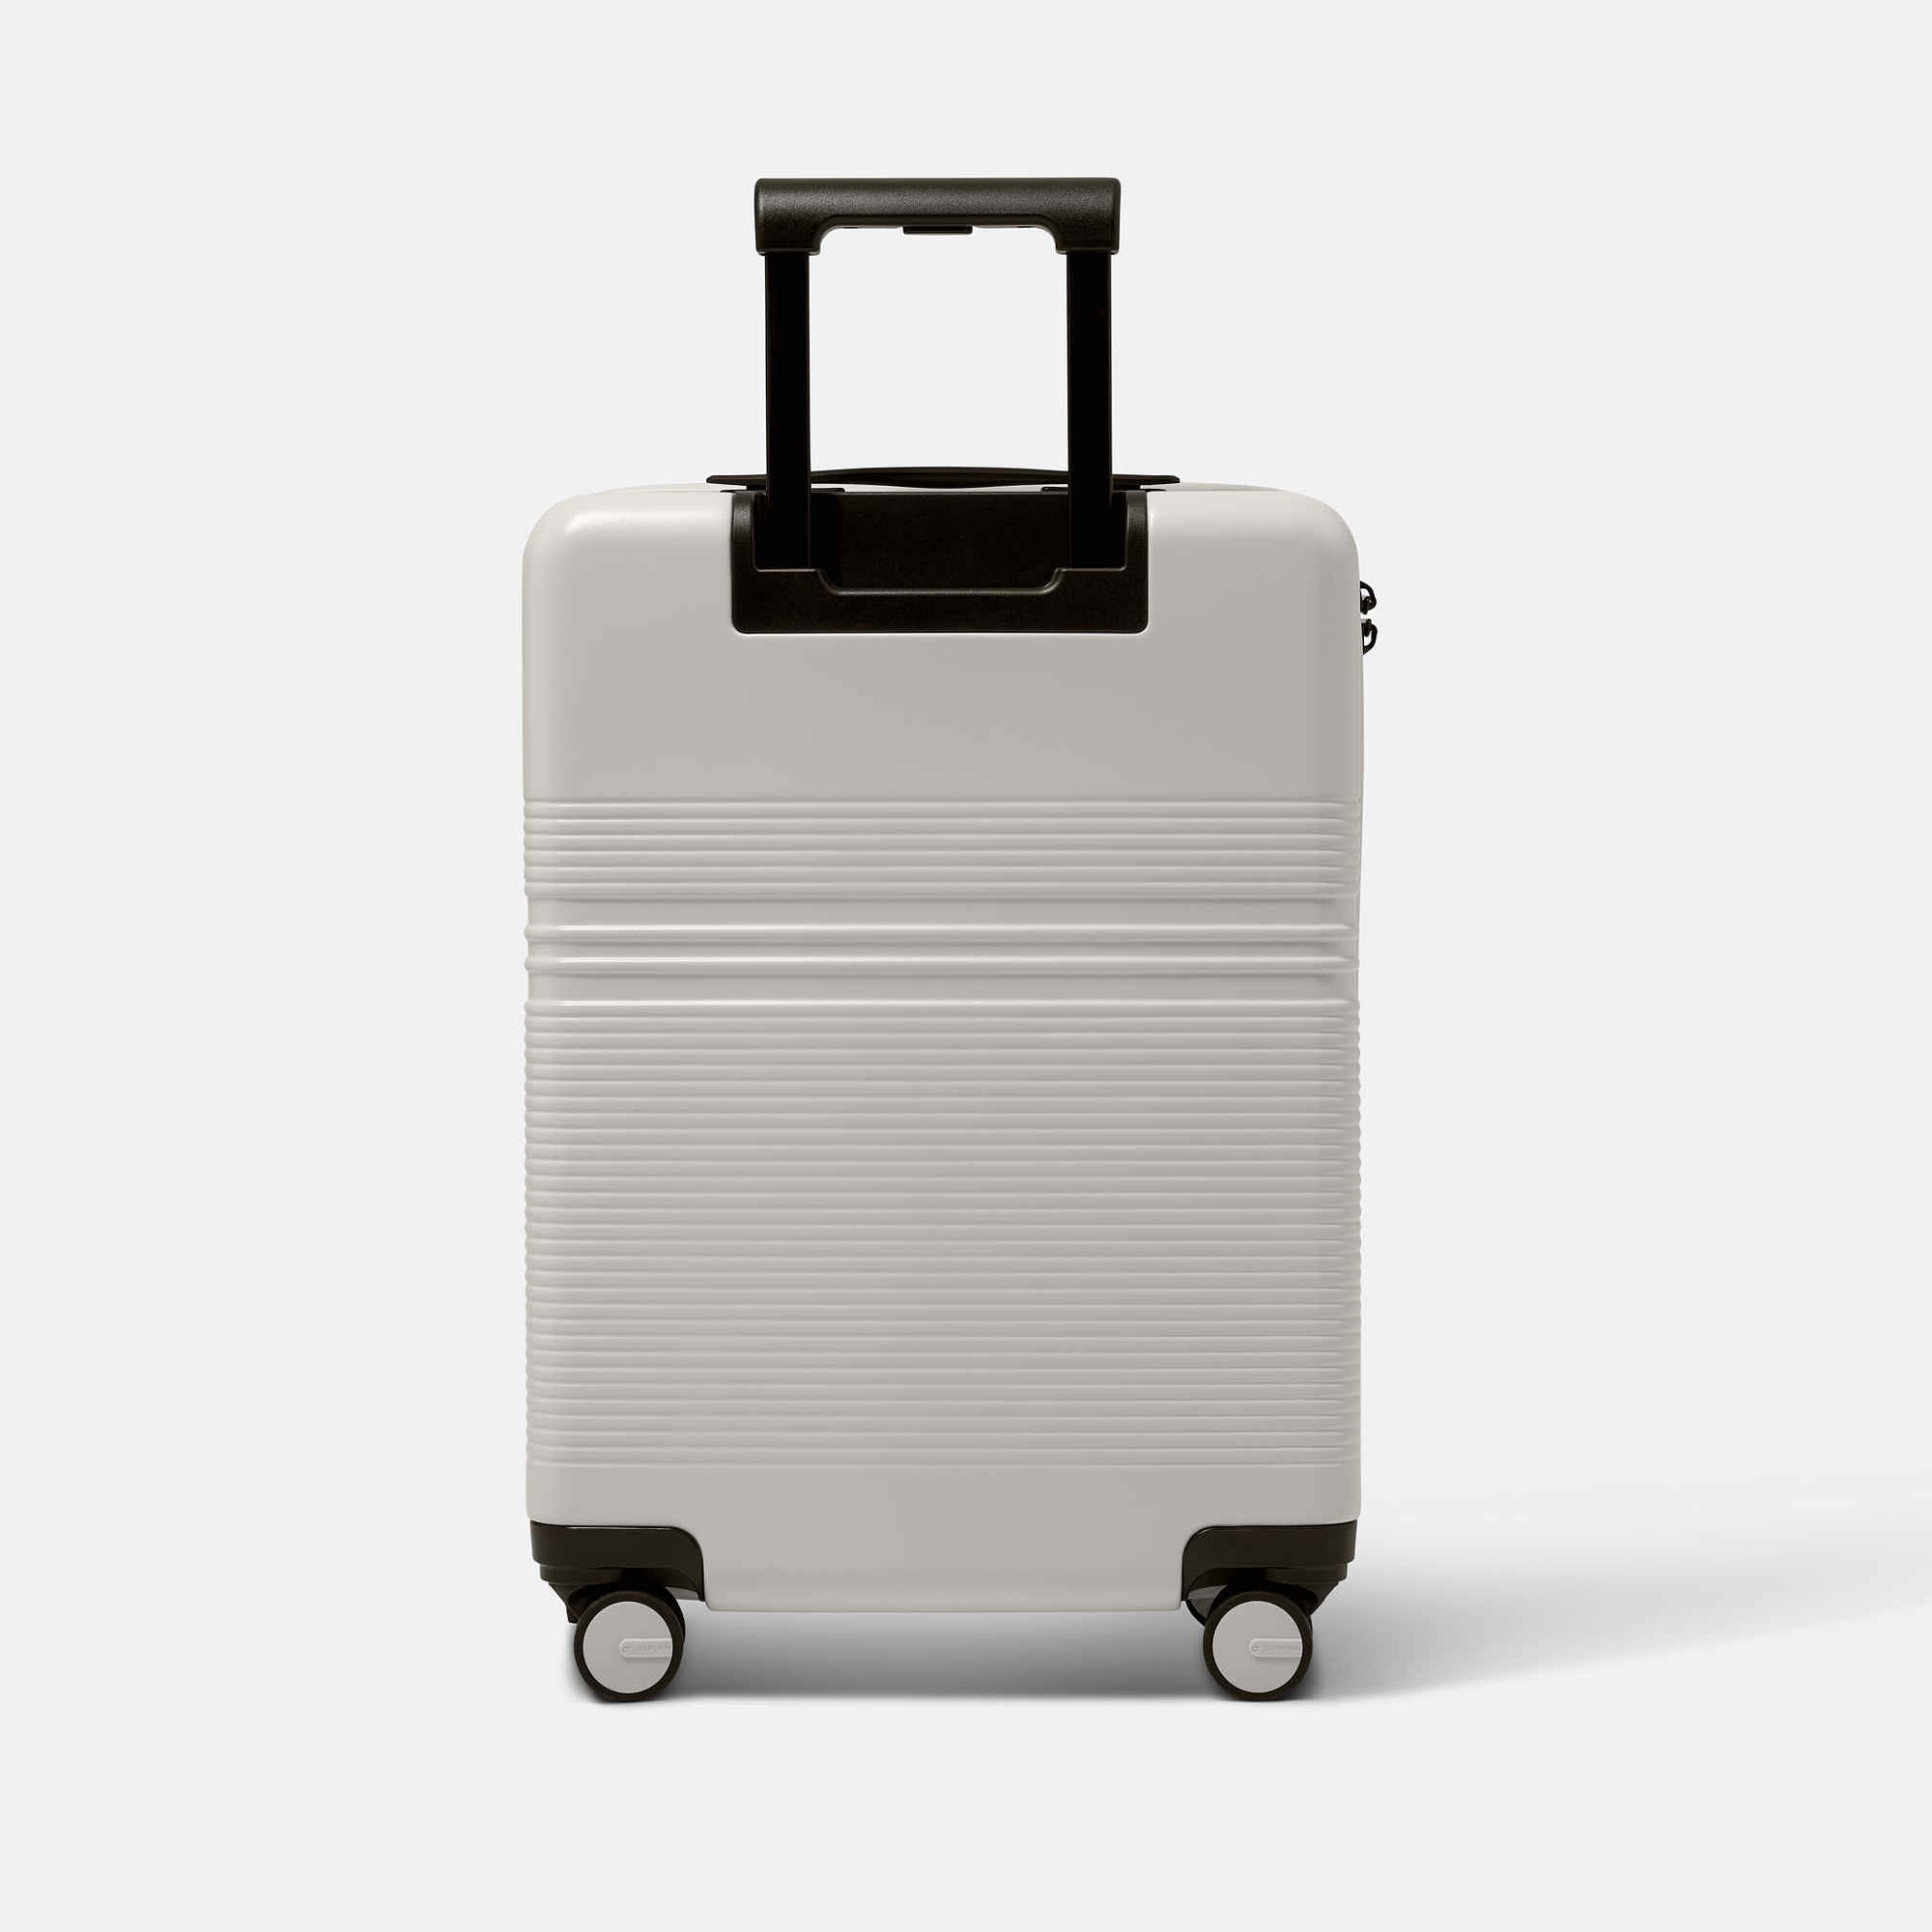 NORTVI sustainable design suitcase Sand white made of durable material.